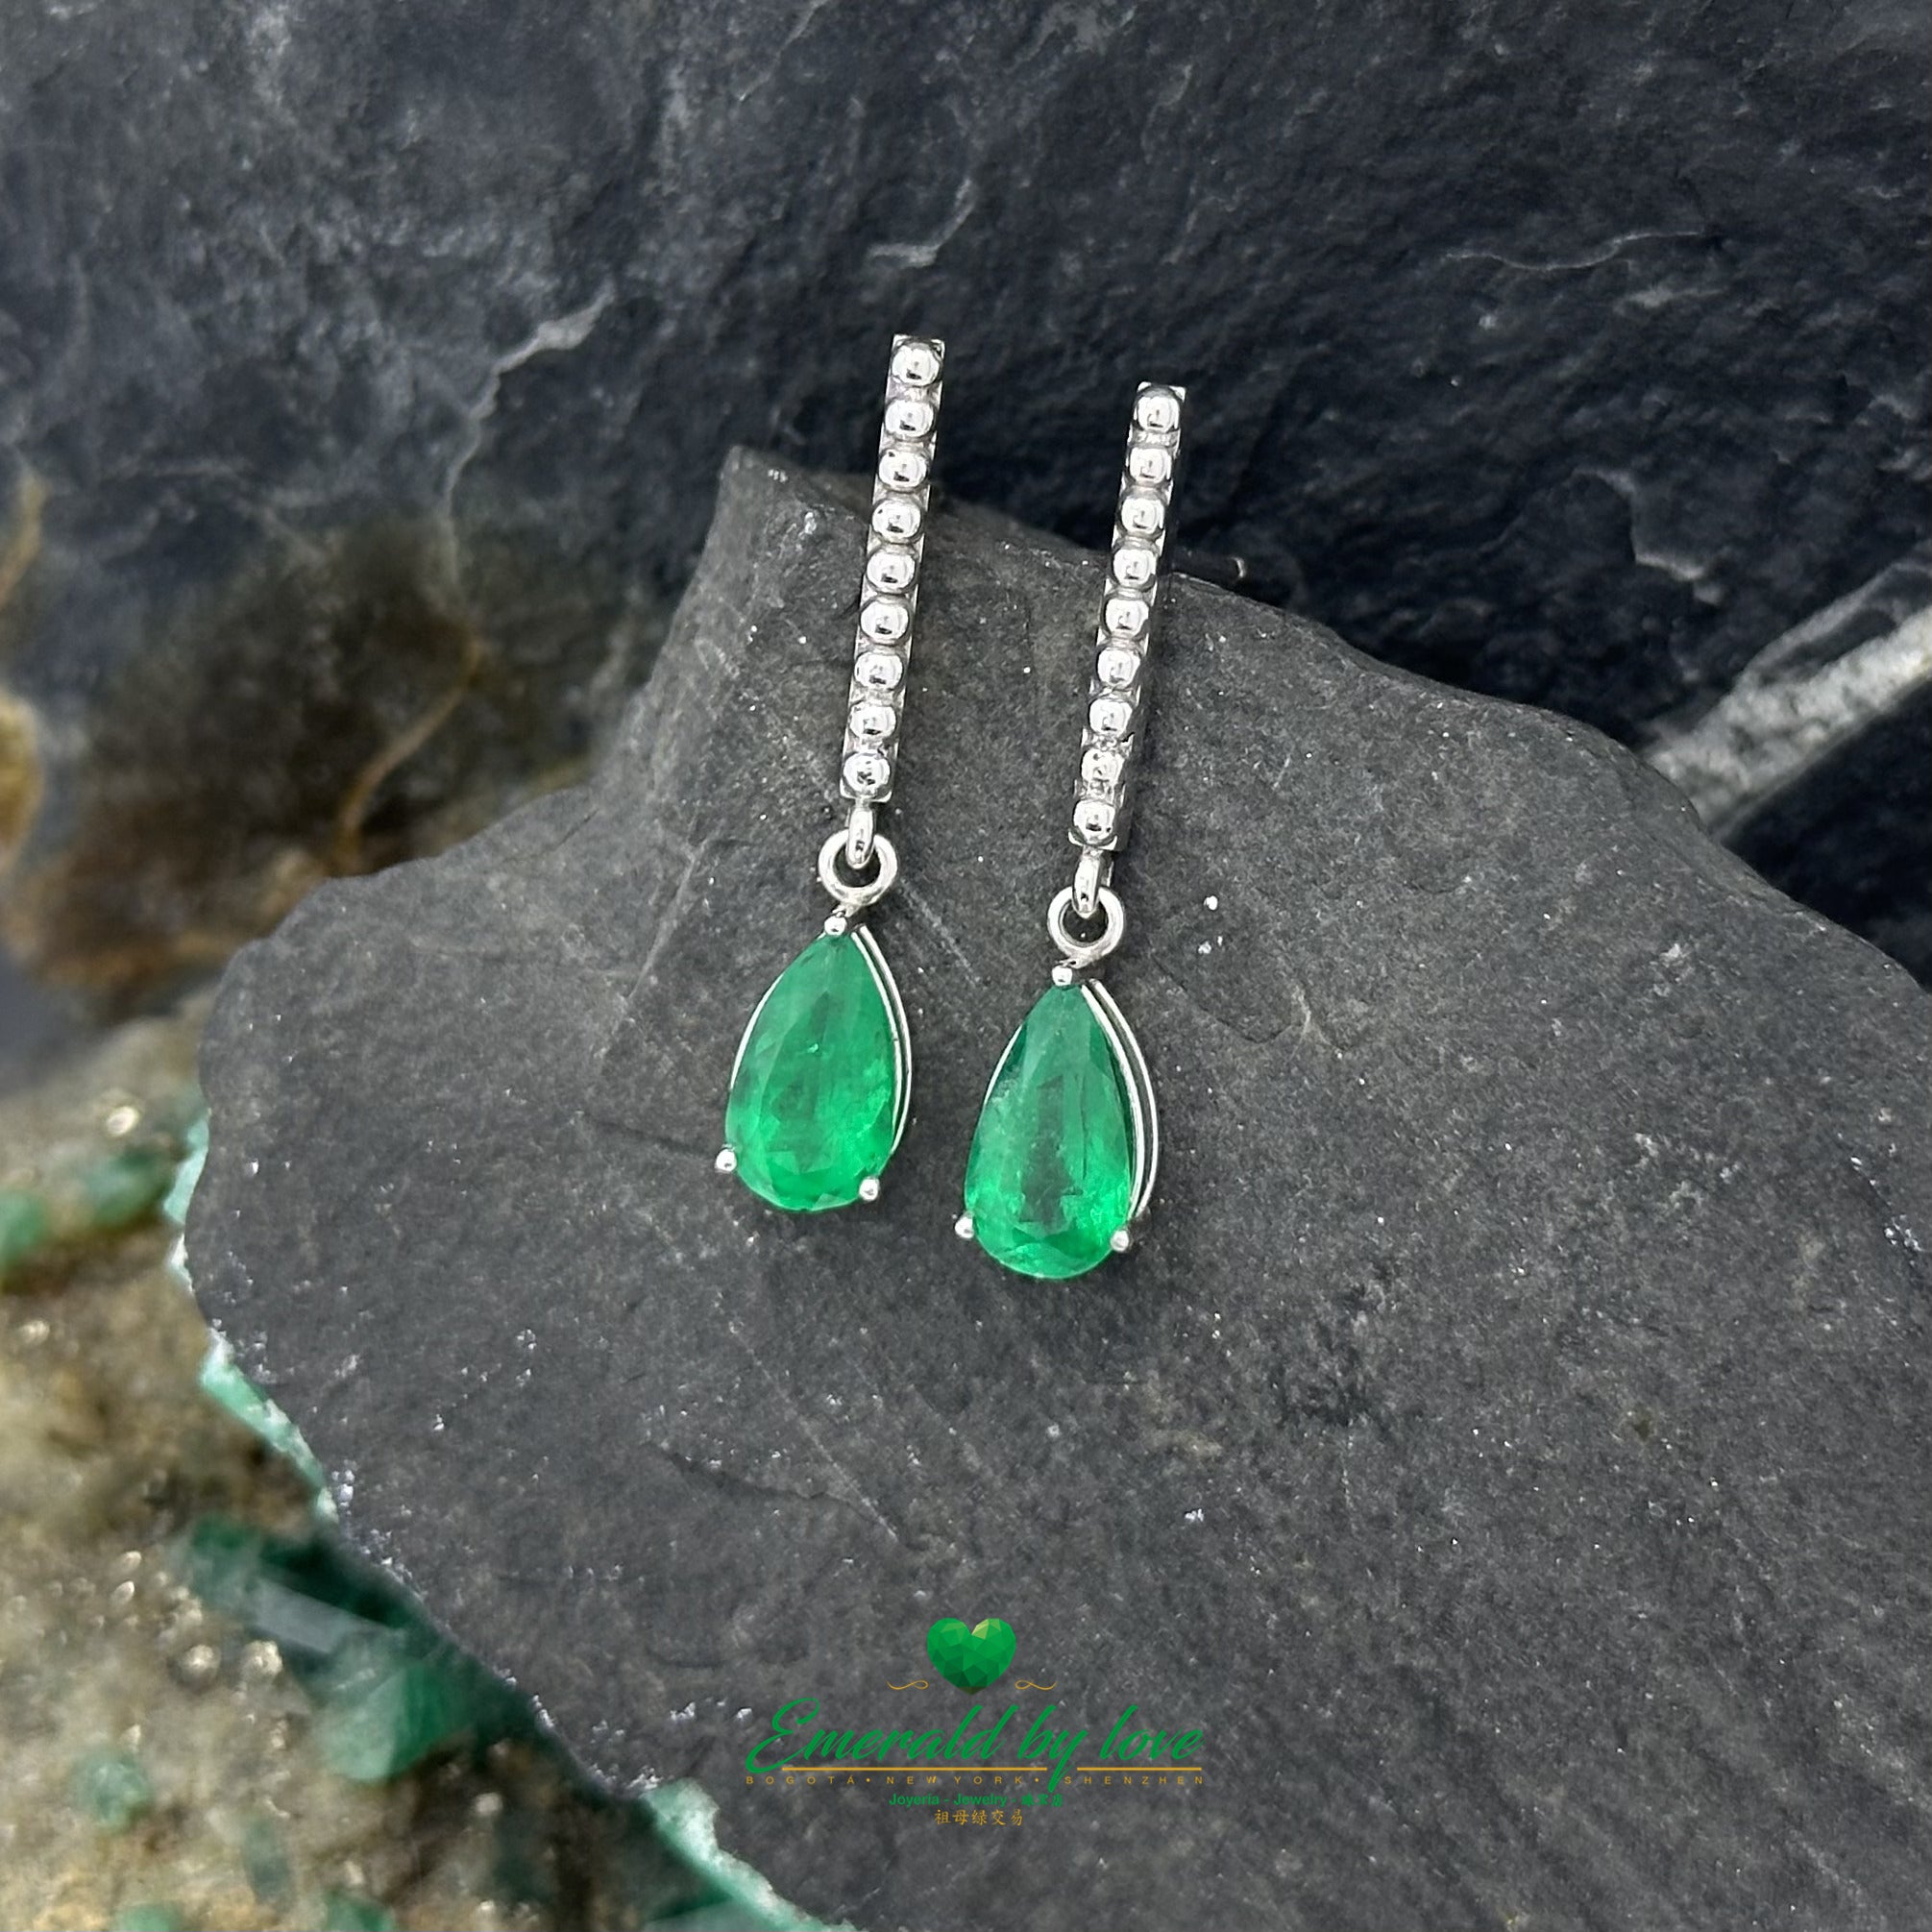 White Gold Serenity: Teardrop Emerald Earrings with Lengthwise Texture